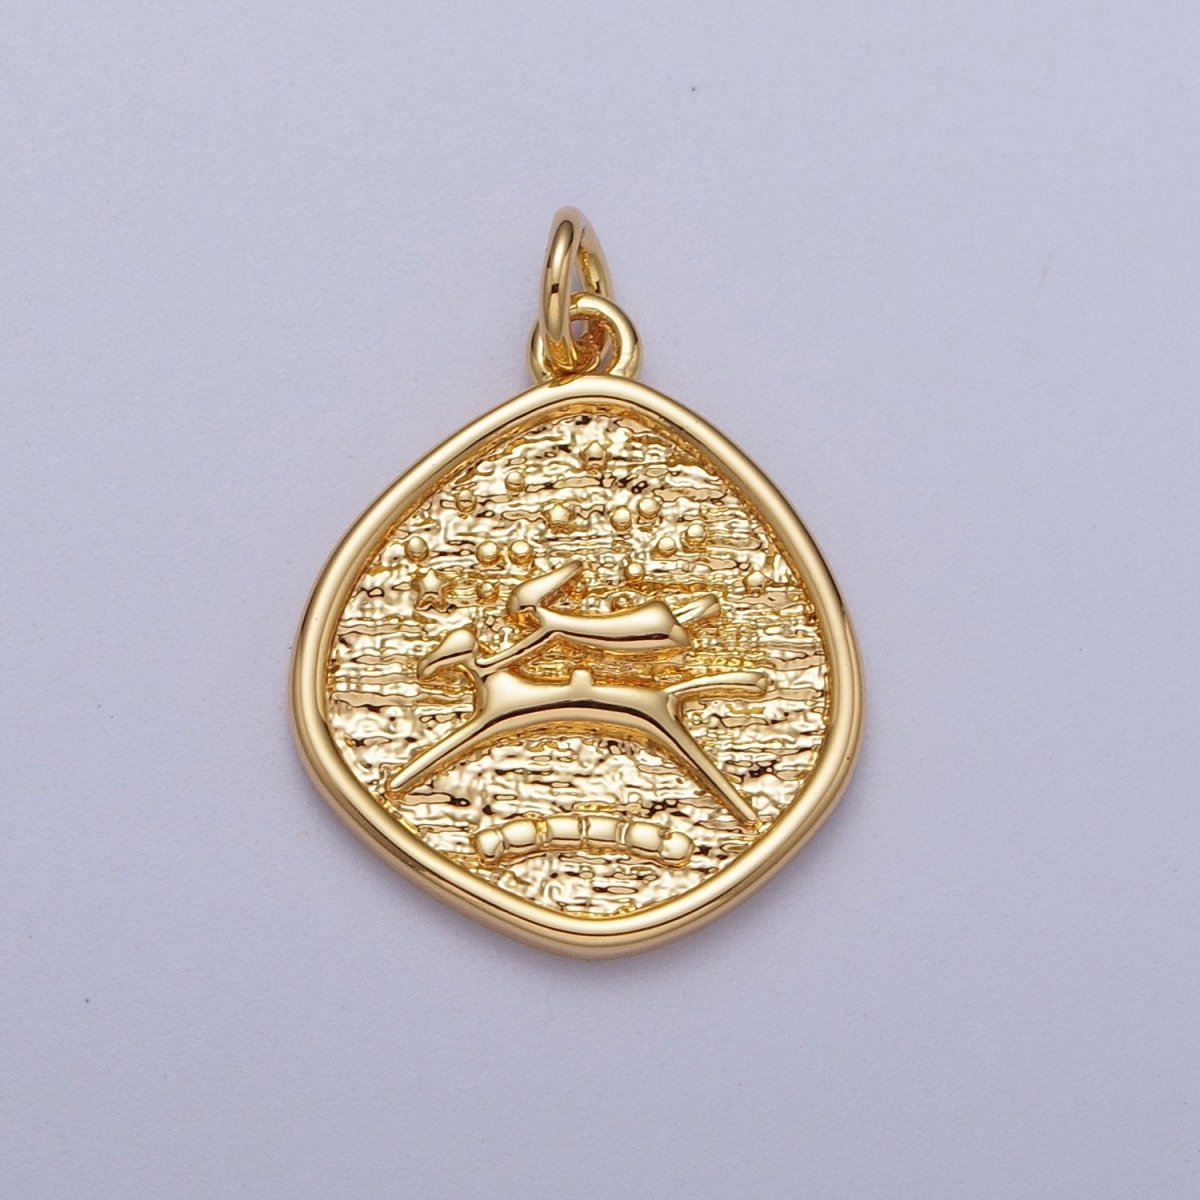 24K Gold Filled Leaping Dog Stamped Textured Charm E-061 - DLUXCA